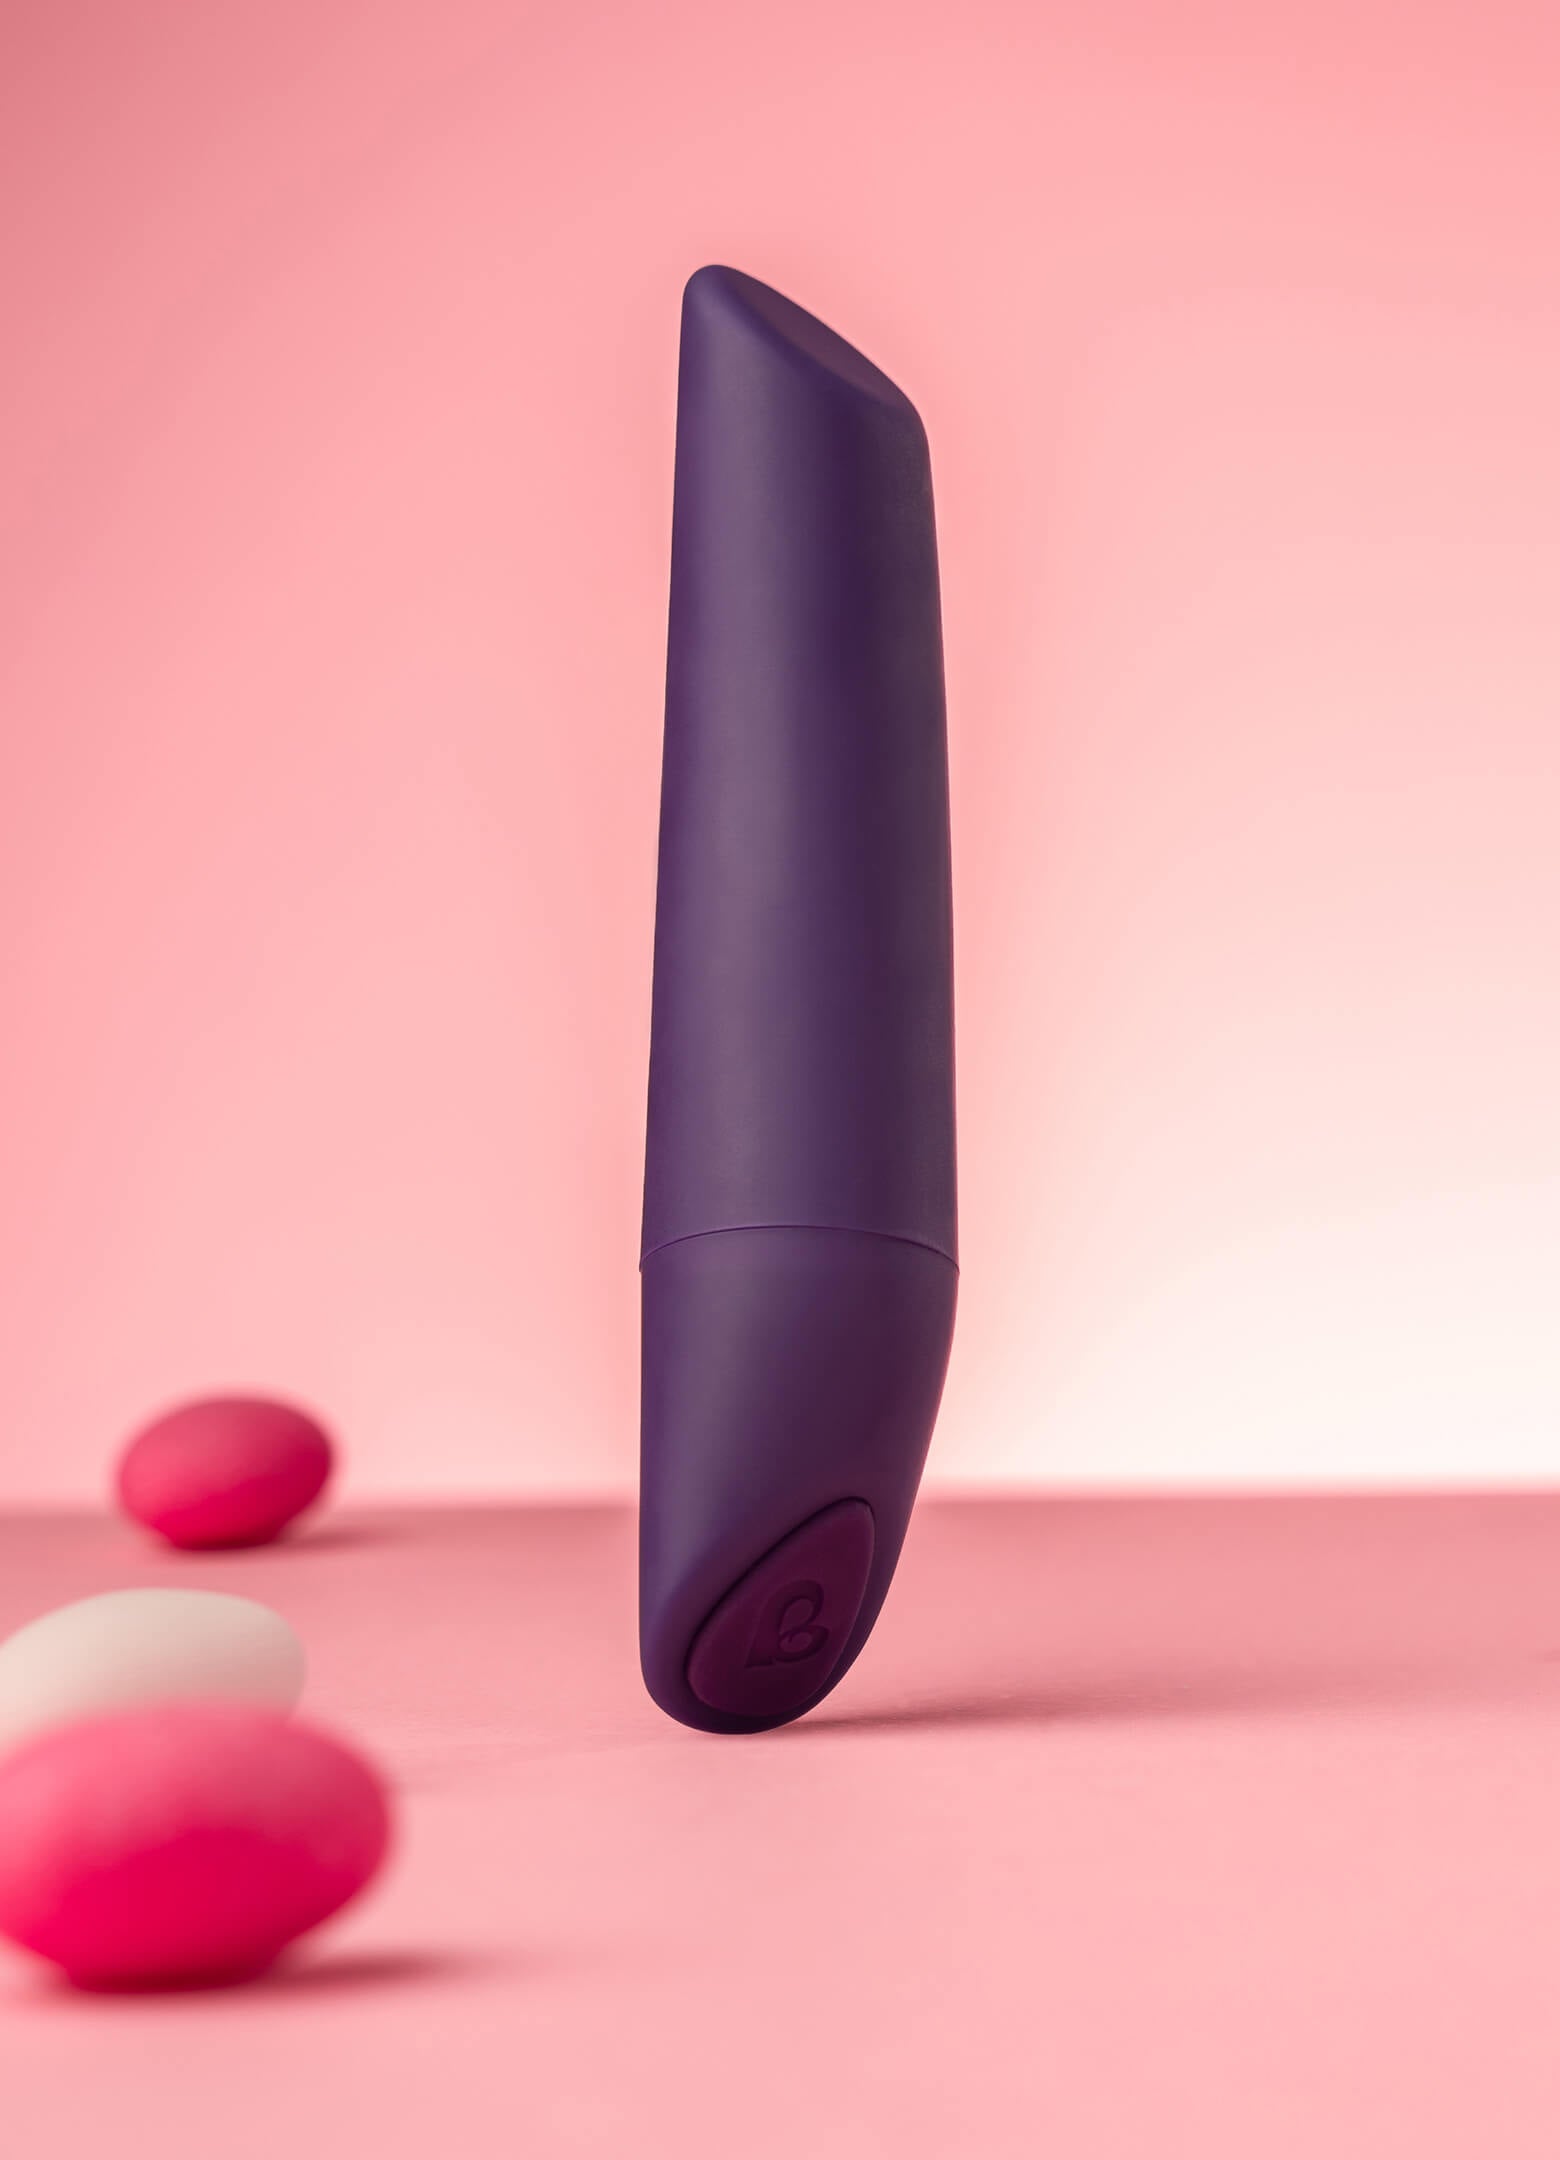 Purple vibrator with a chiseled and flat tip.